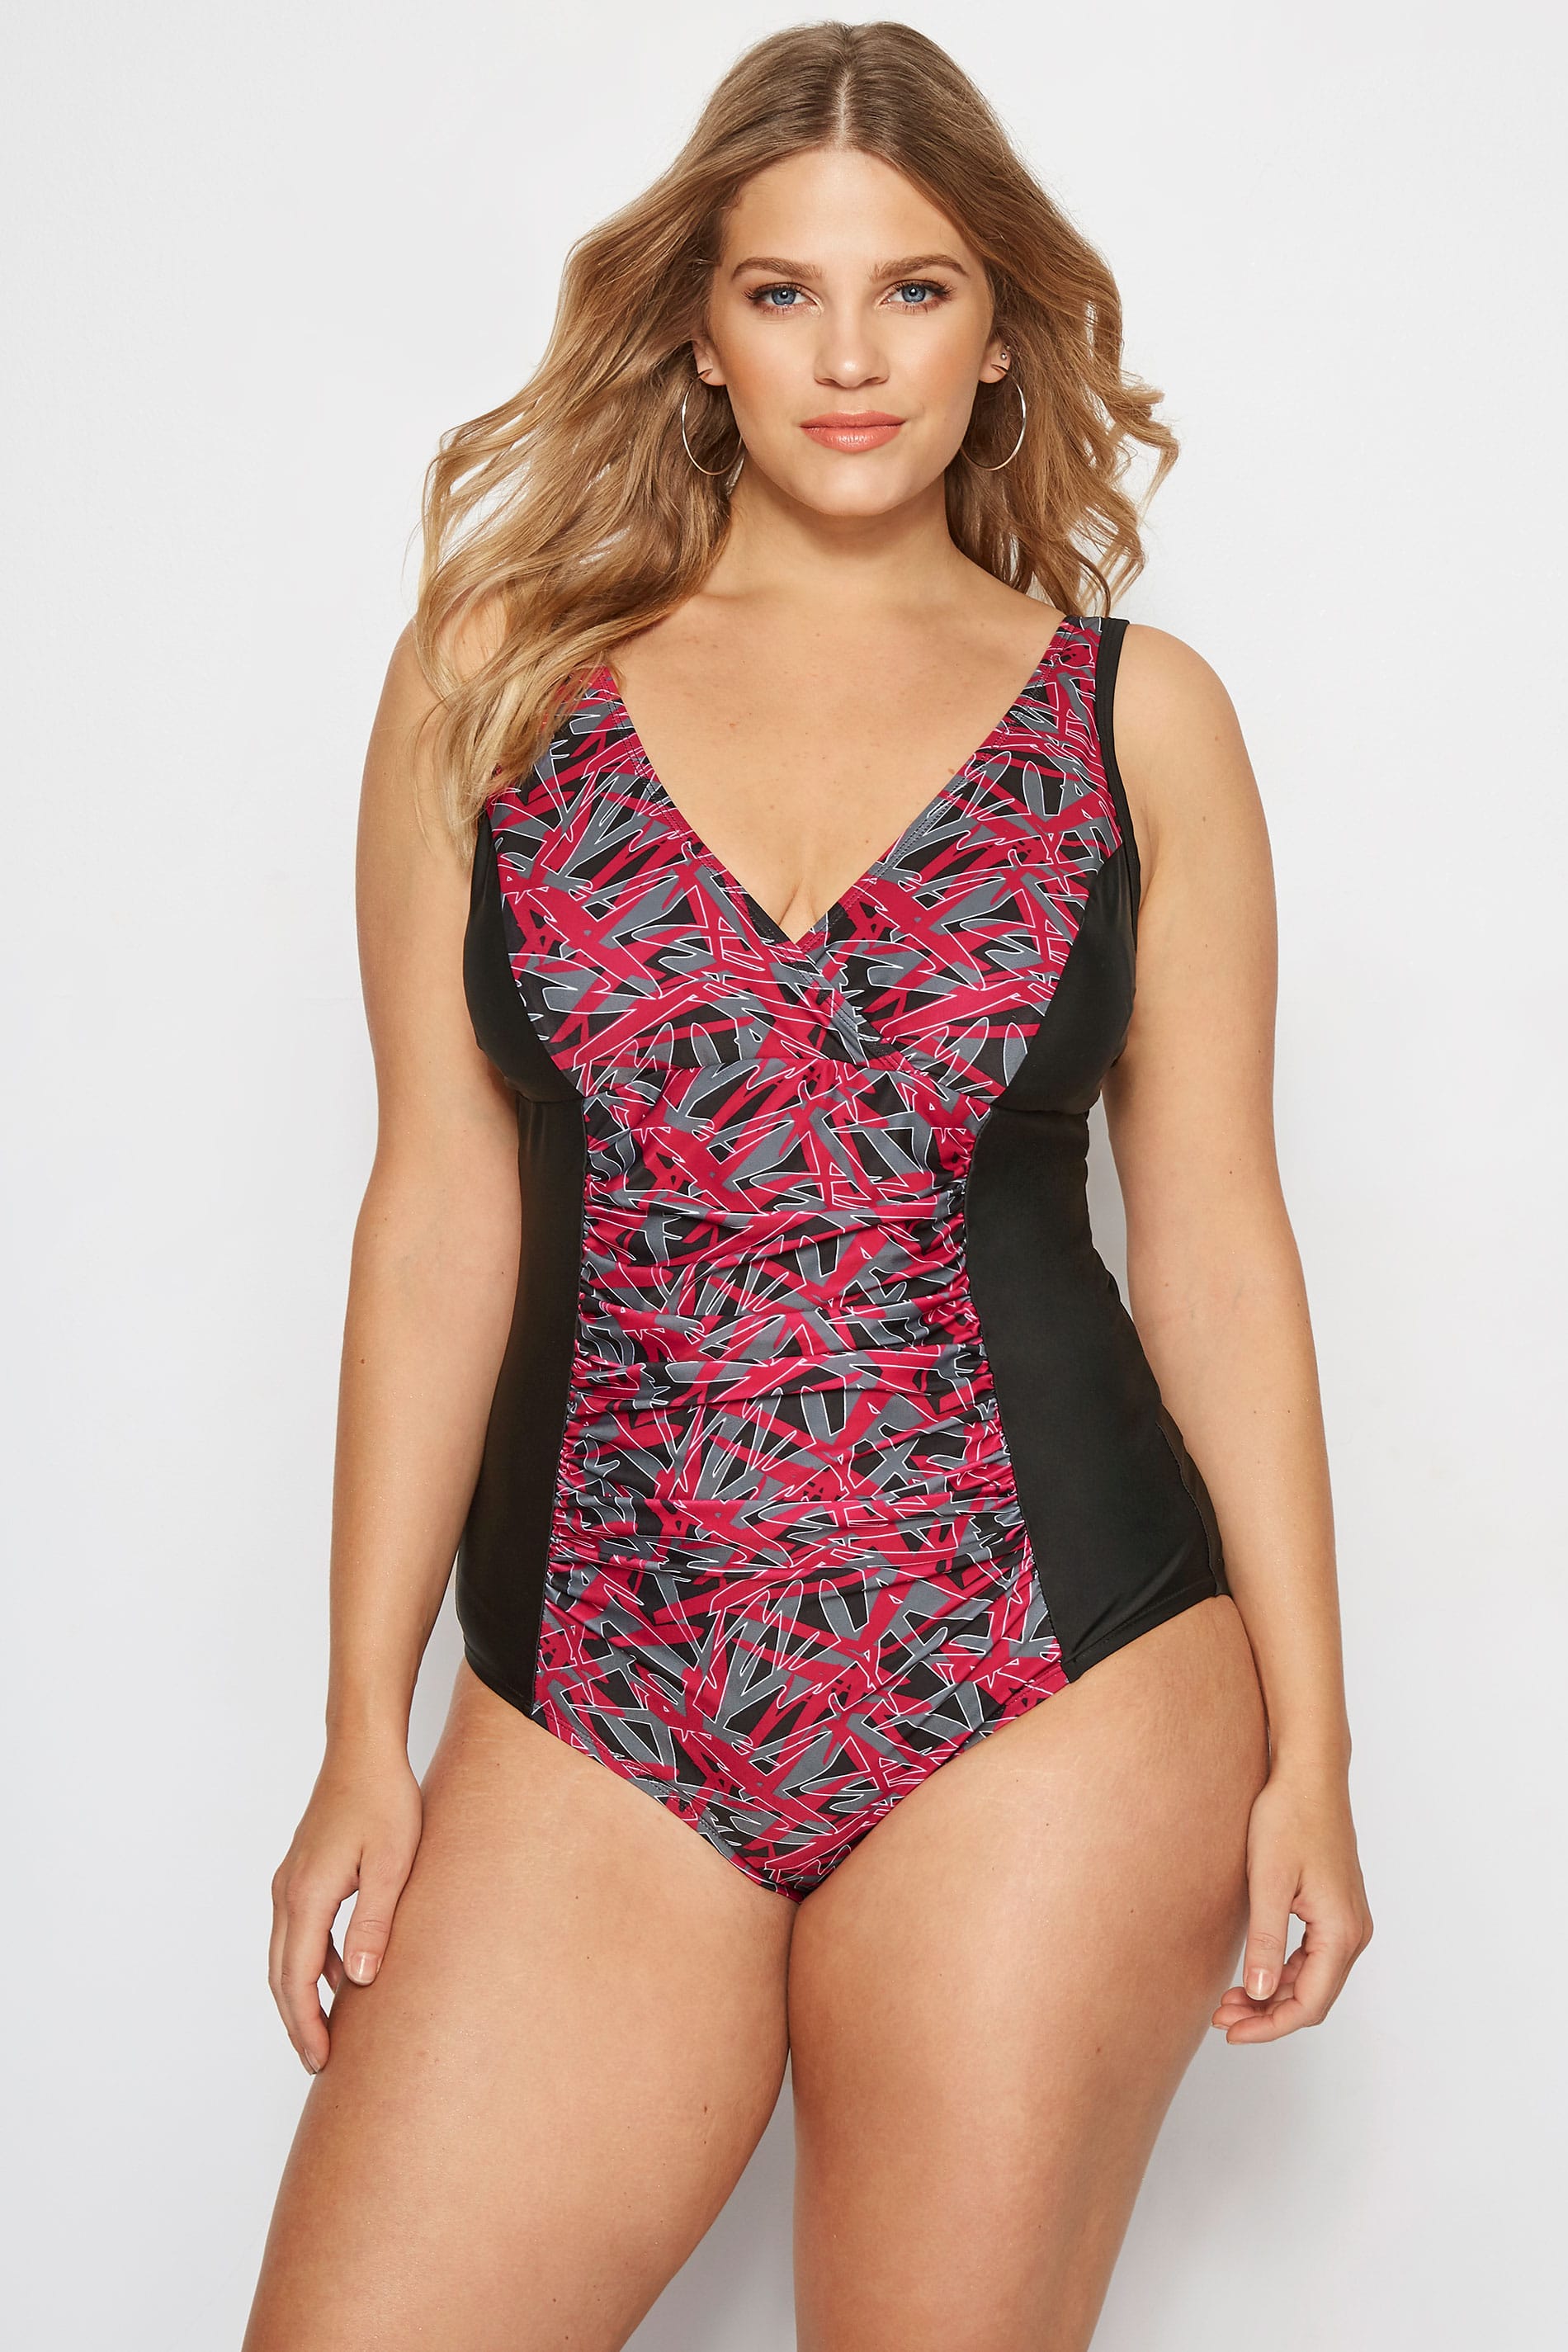 Yours Clothing Black & pink abstract swimsuit